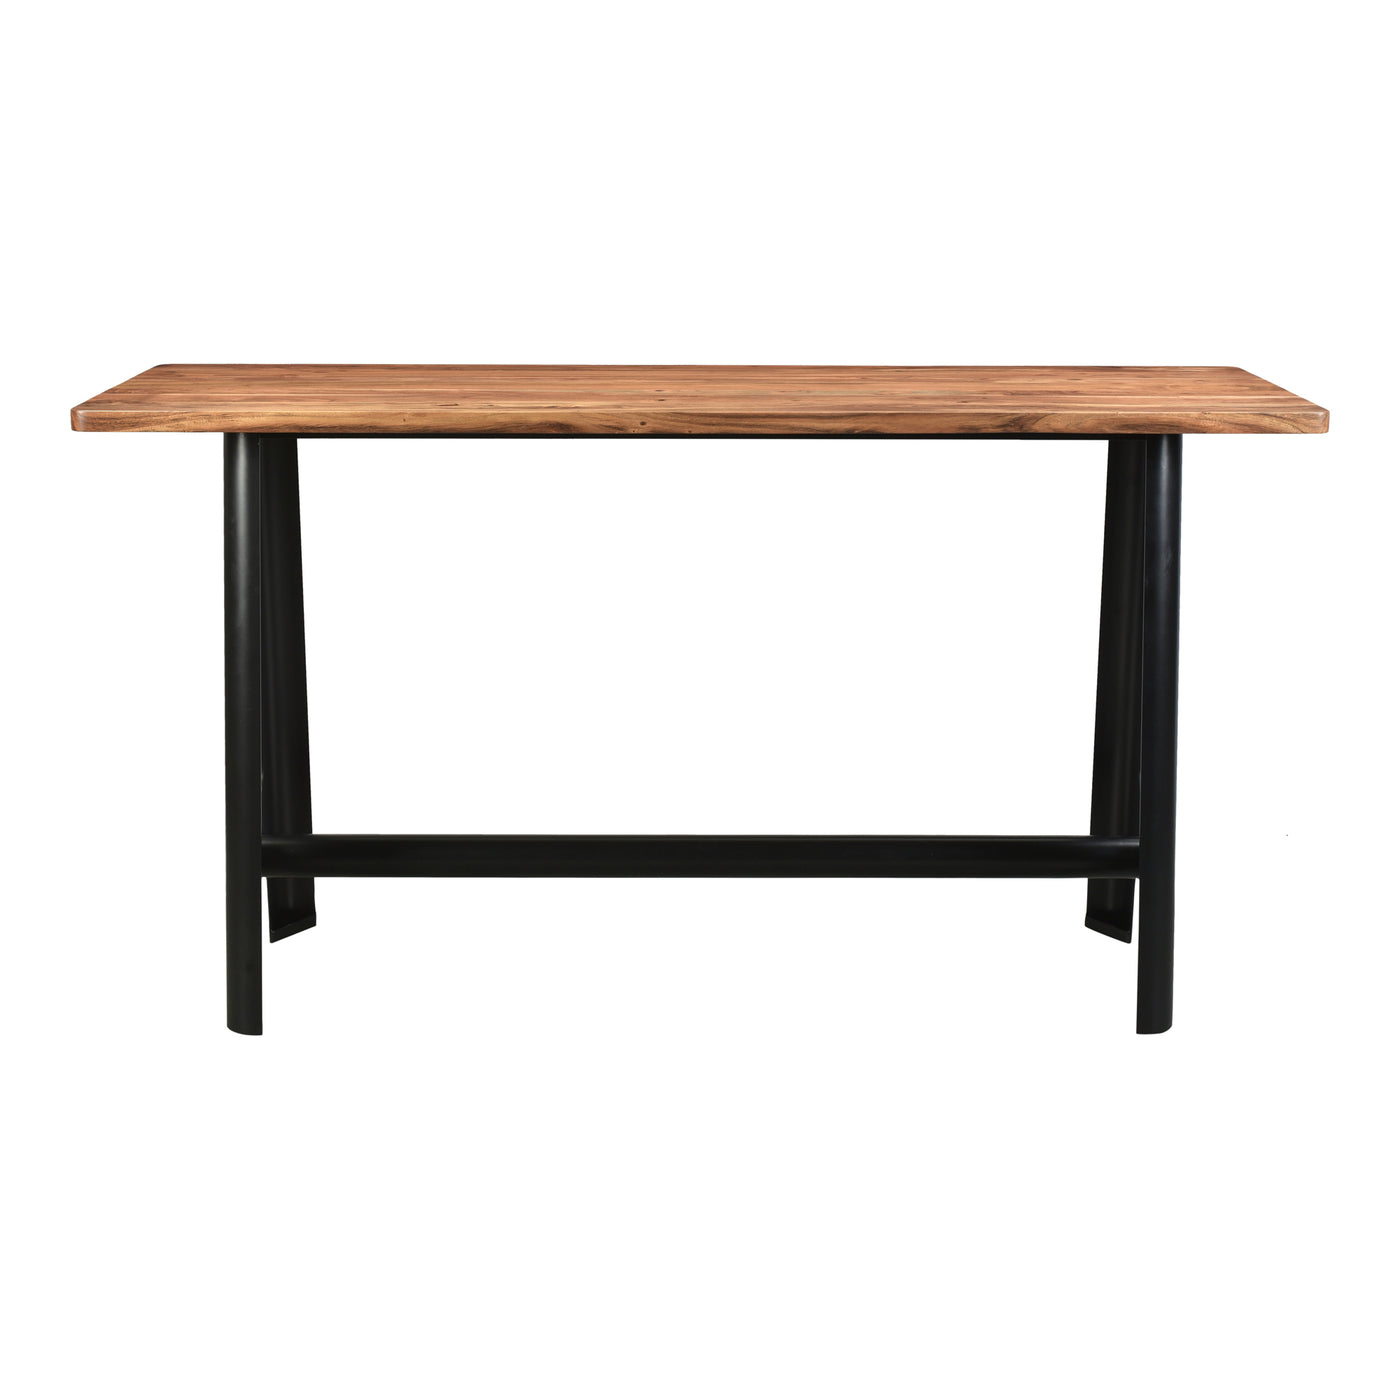 Industrial style at its finest. The Craftsman Bar Table features a beautiful, solid acacia-wood top with a warm, caramel f...